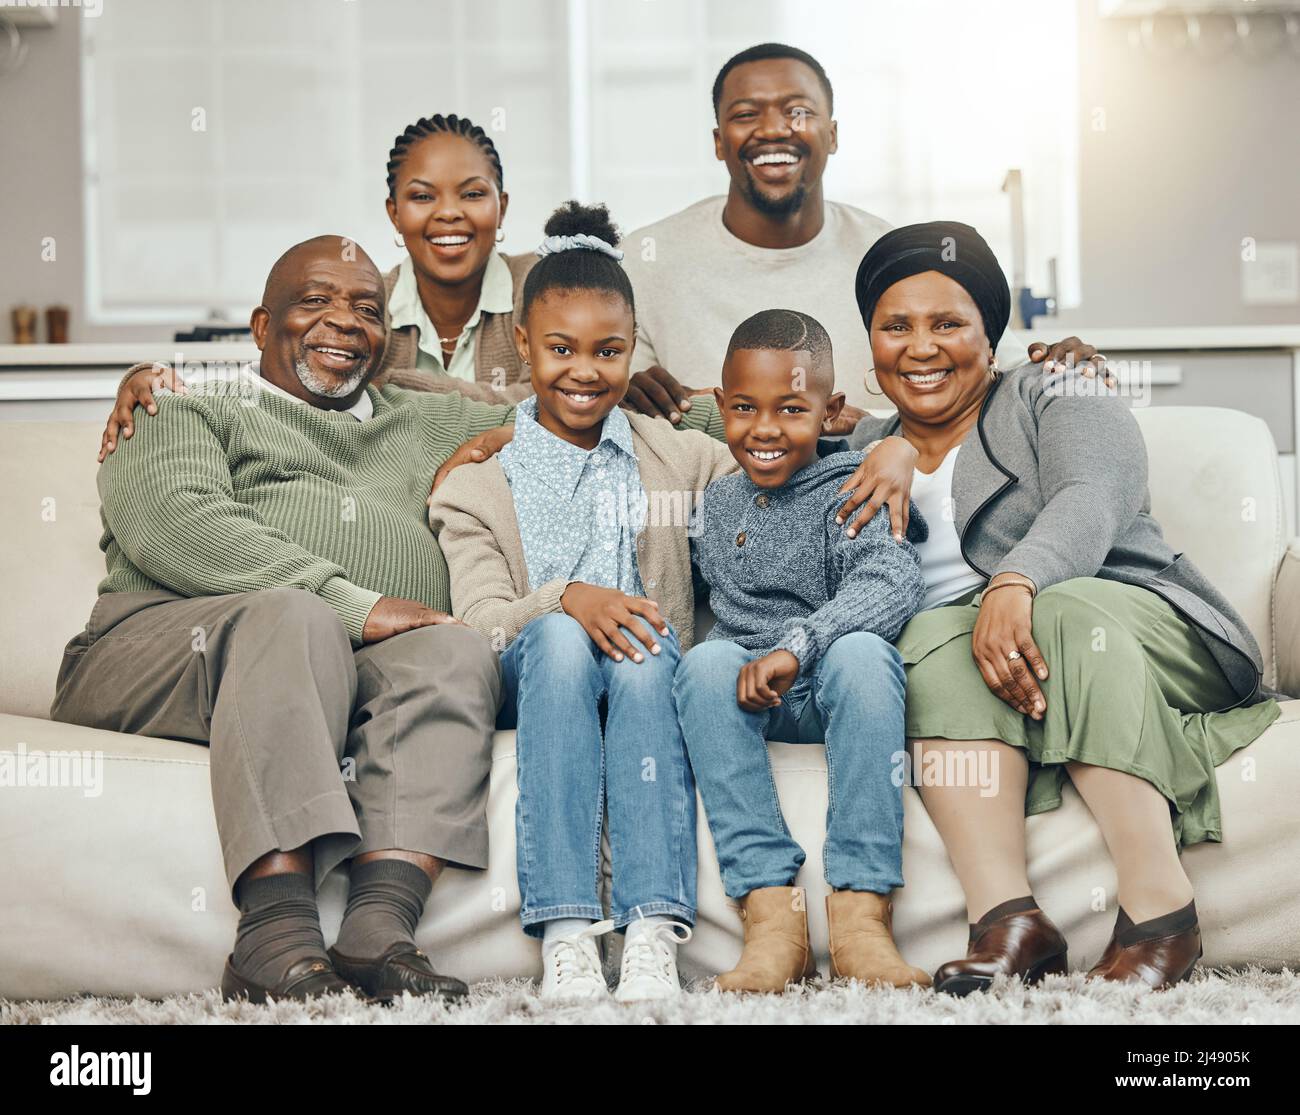 Family is forever. Shot of a family bonding on a sofa at home. Stock Photo